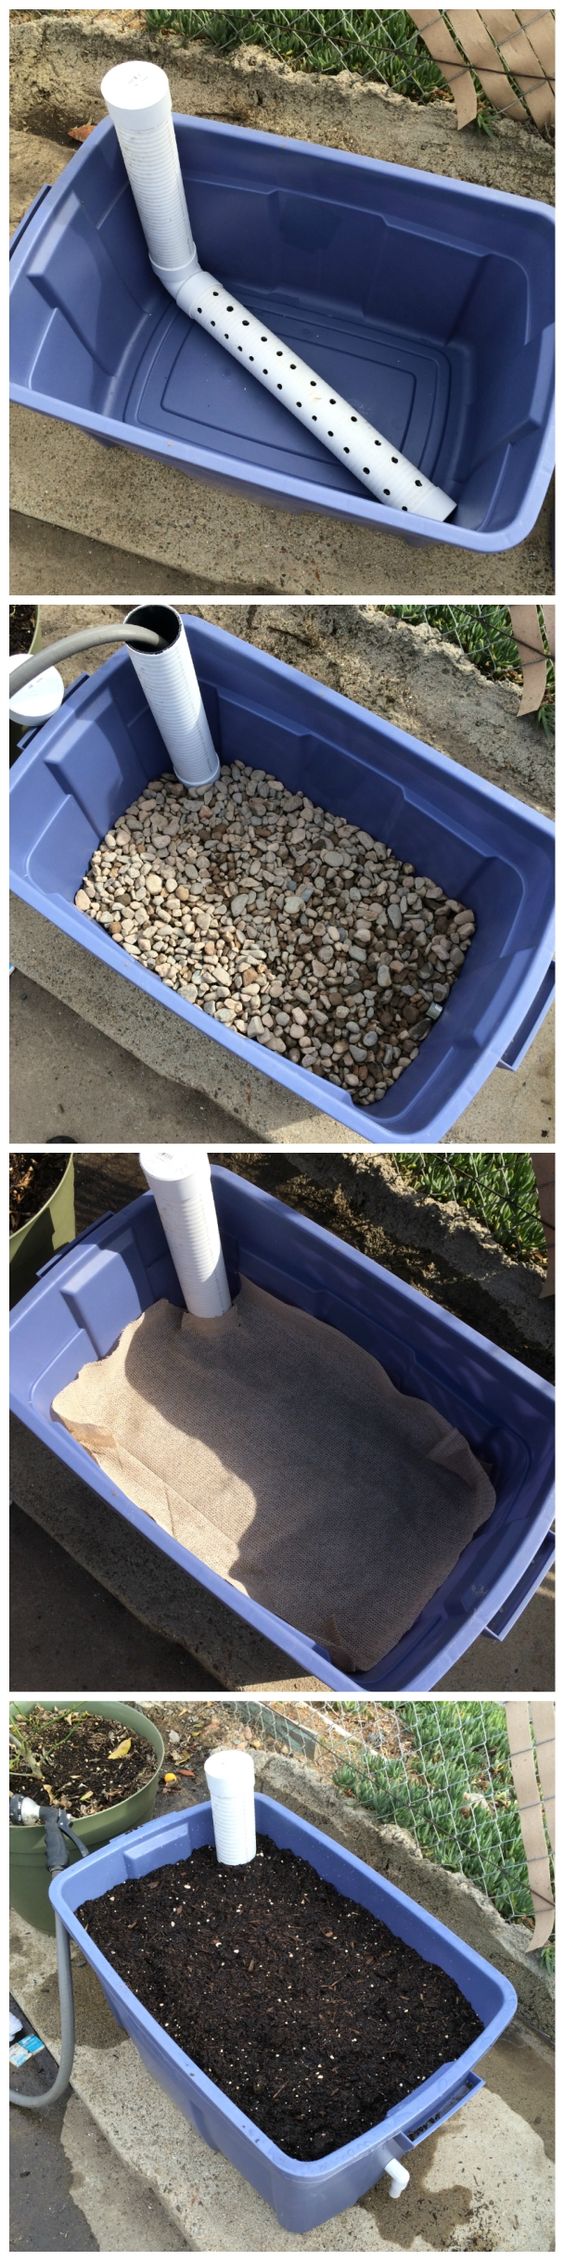 DIY Wicking Bed Container Gardening